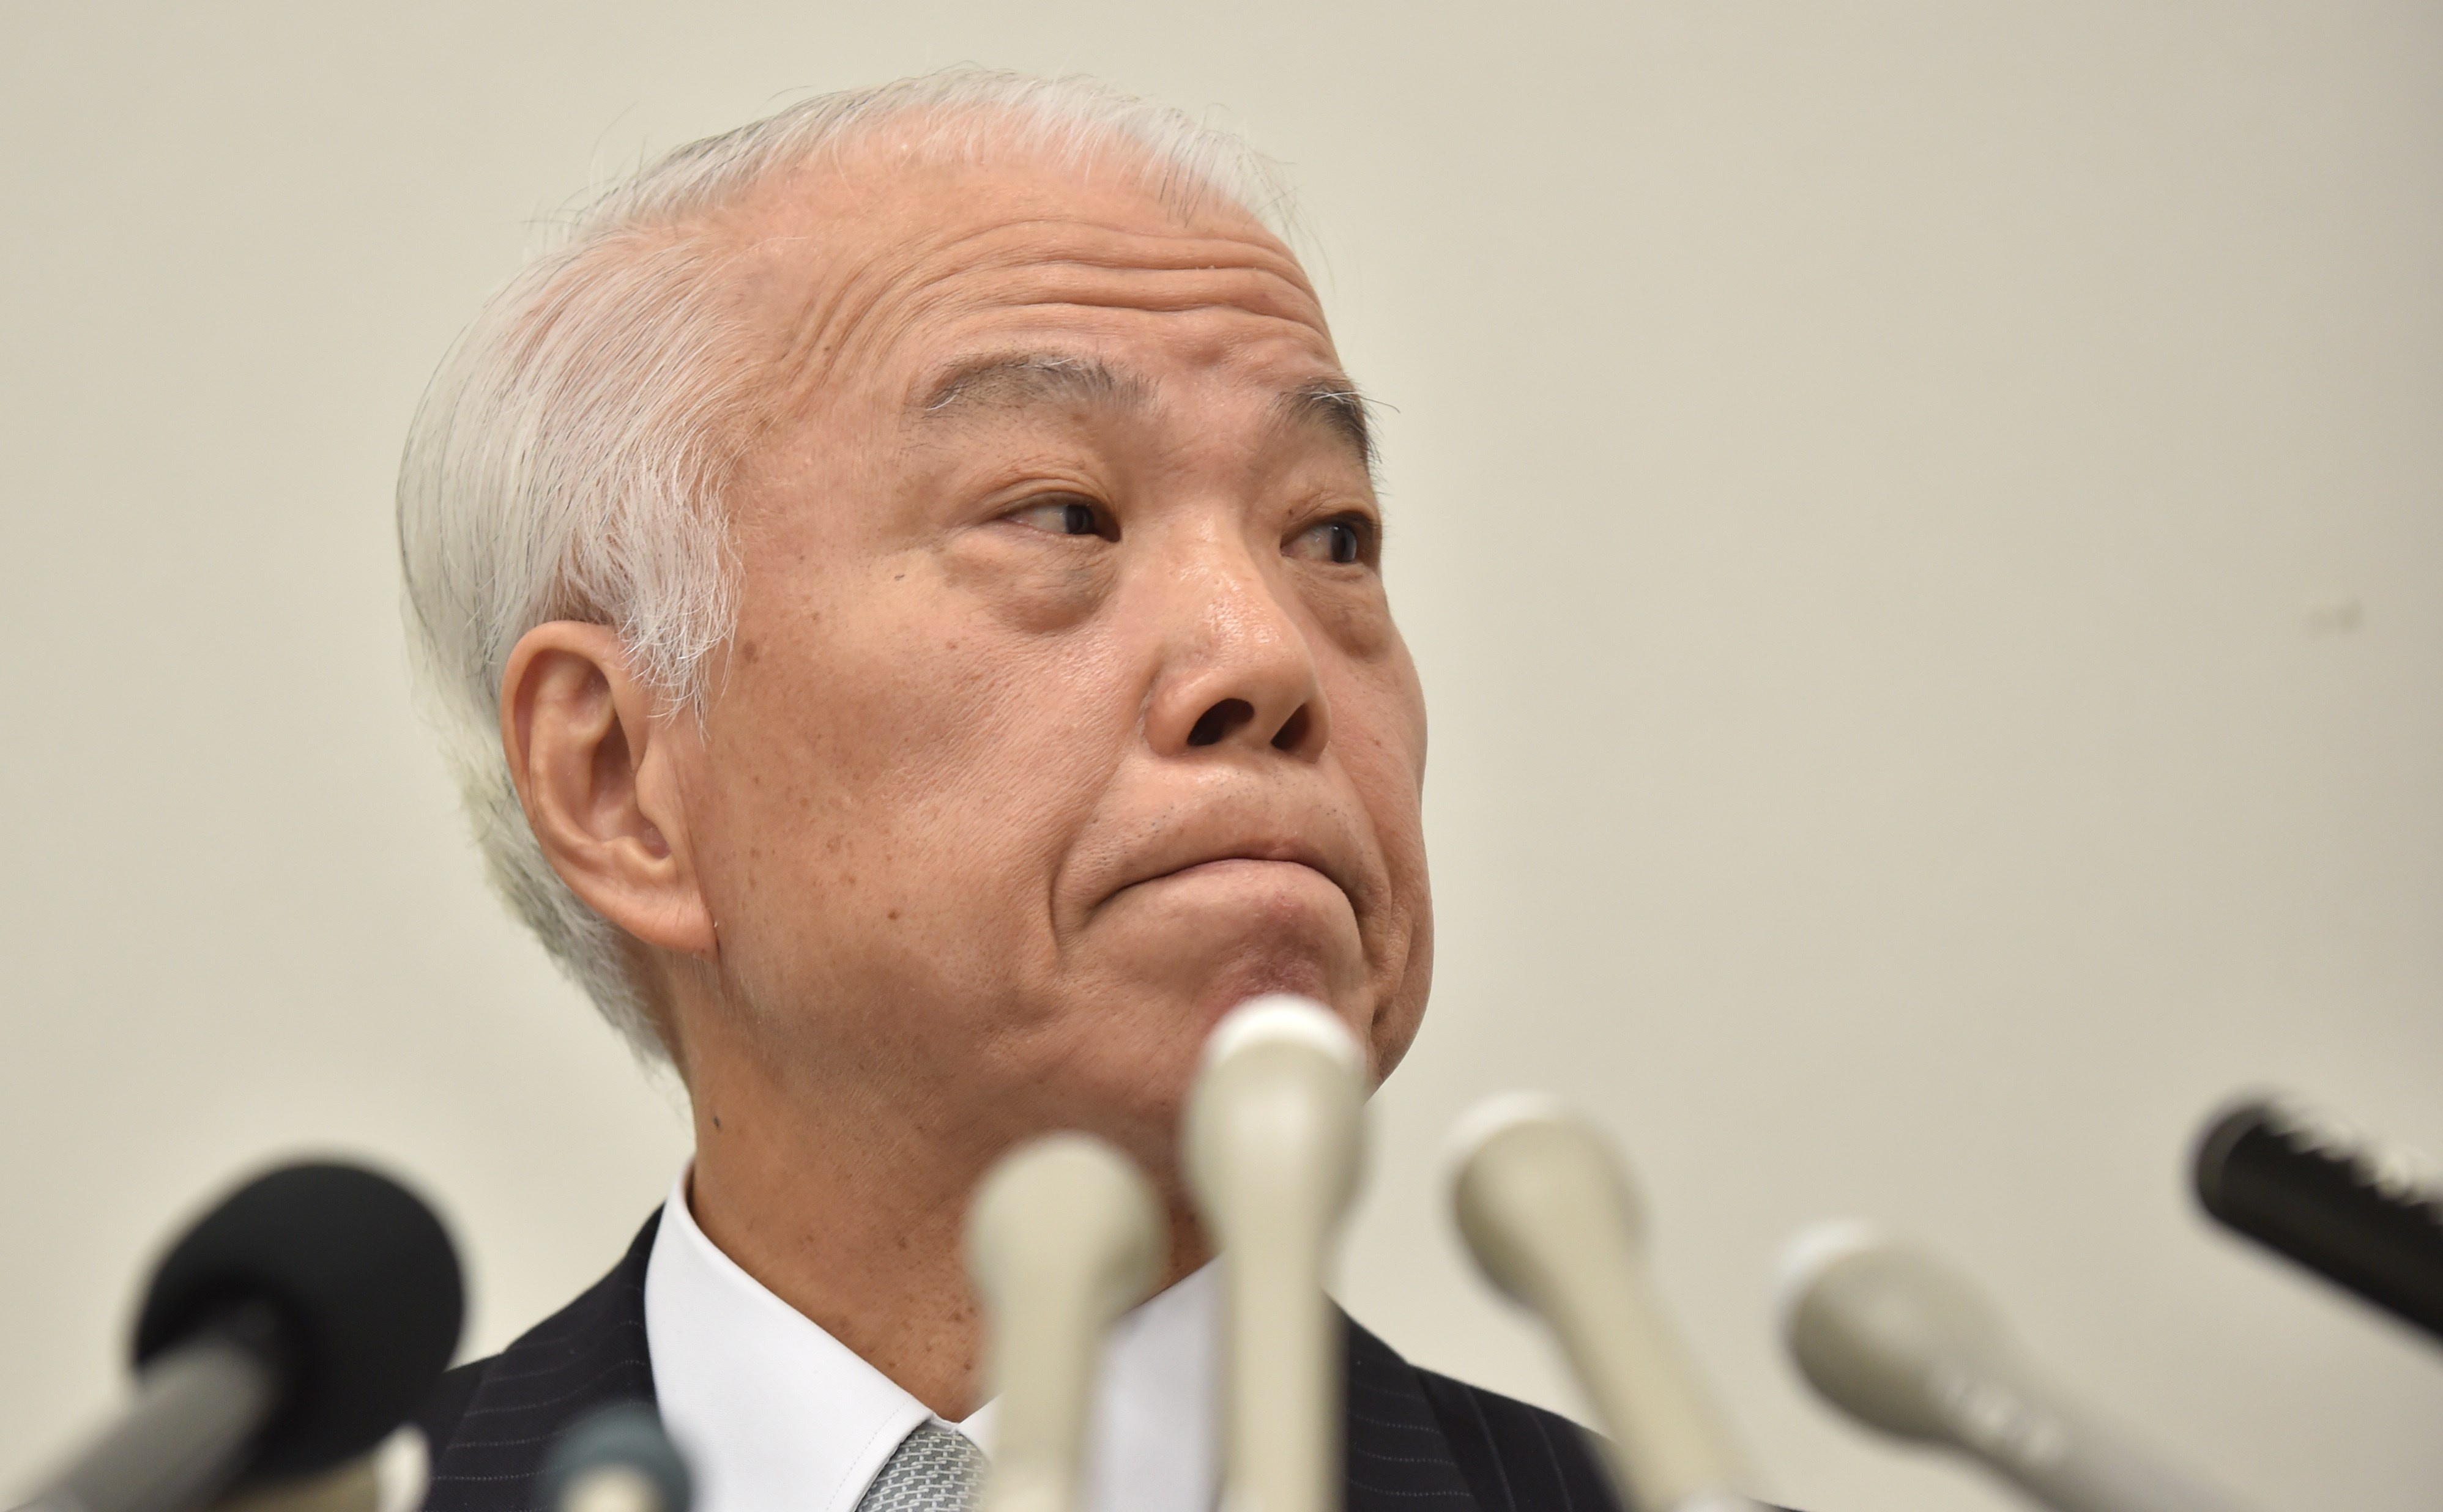 Japanese airbag supplier Takata Corp. Chief Financial Officer Yoichiro Nomura holds a press briefing to announce the company's financial results in Tokyo on November 6, 2015. (KAZUHIRO NOGI/AFP/Getty Images)